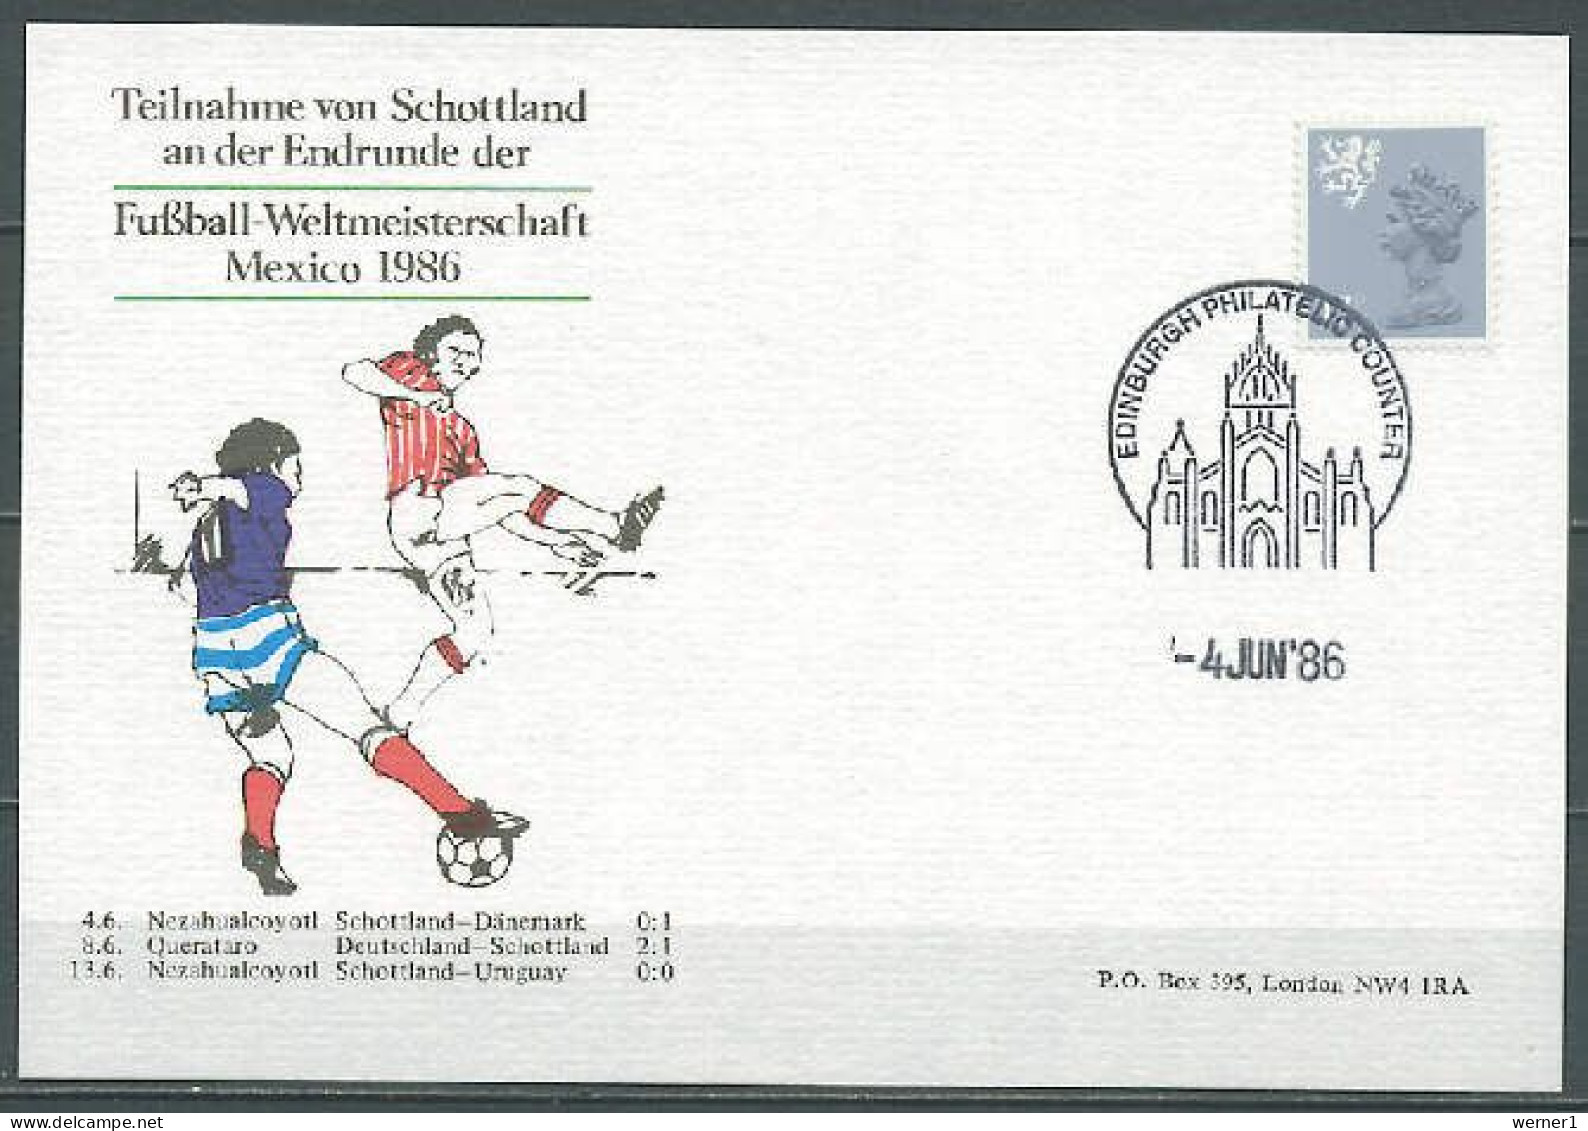 Scotland 1986 Football Soccer World Cup Commemorative Postcard With Results Of The Scottish Team - 1986 – Mexique